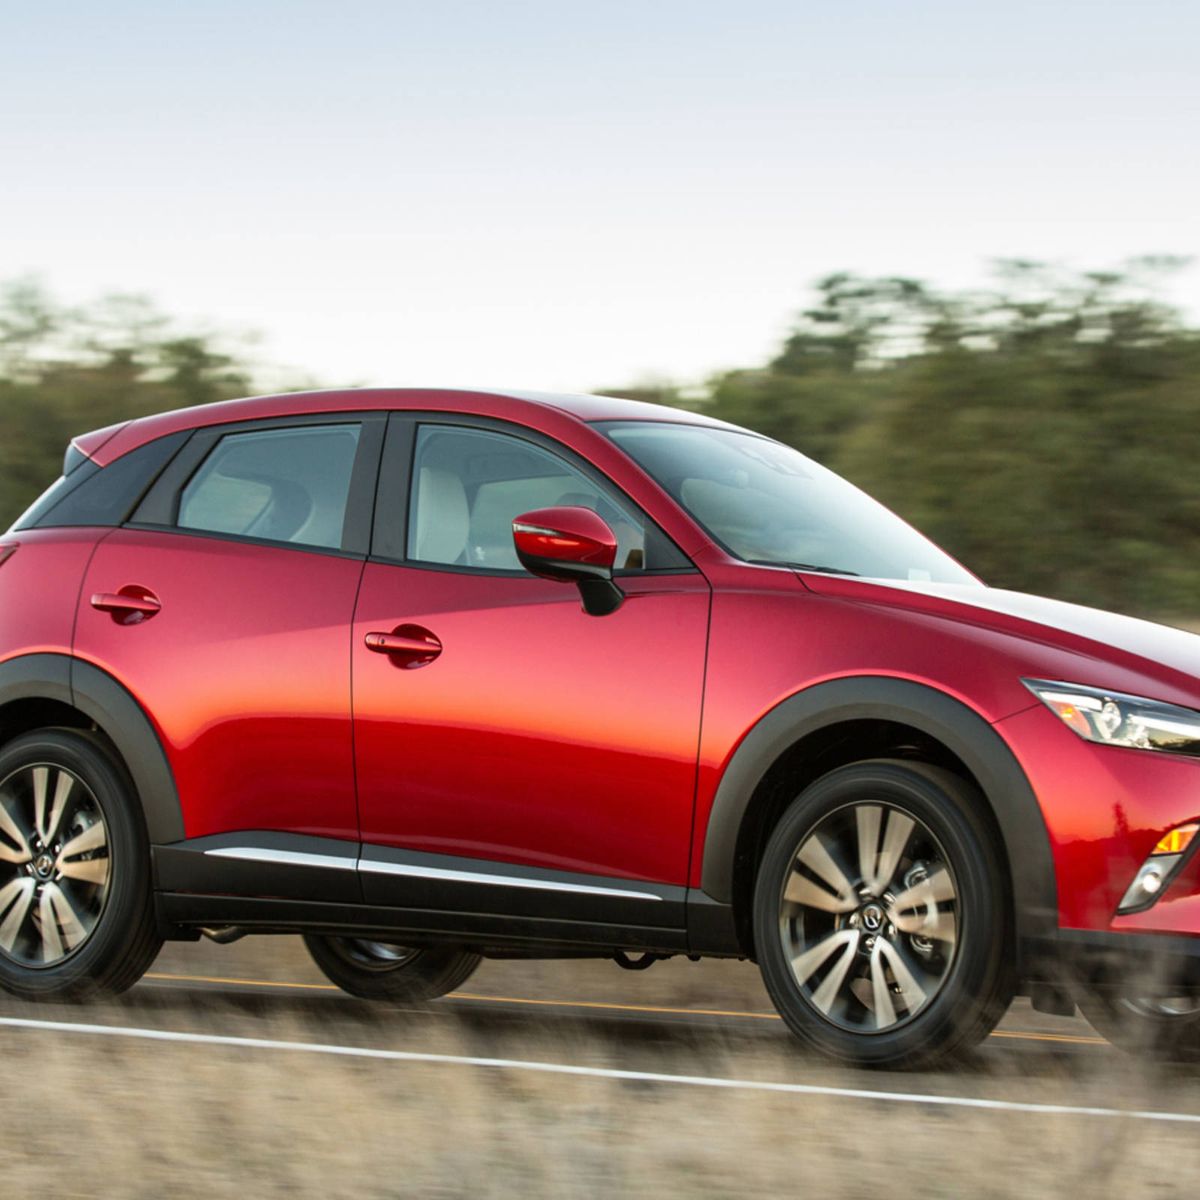 2017 Mazda CX-3 review: A sharp subcompact that itself